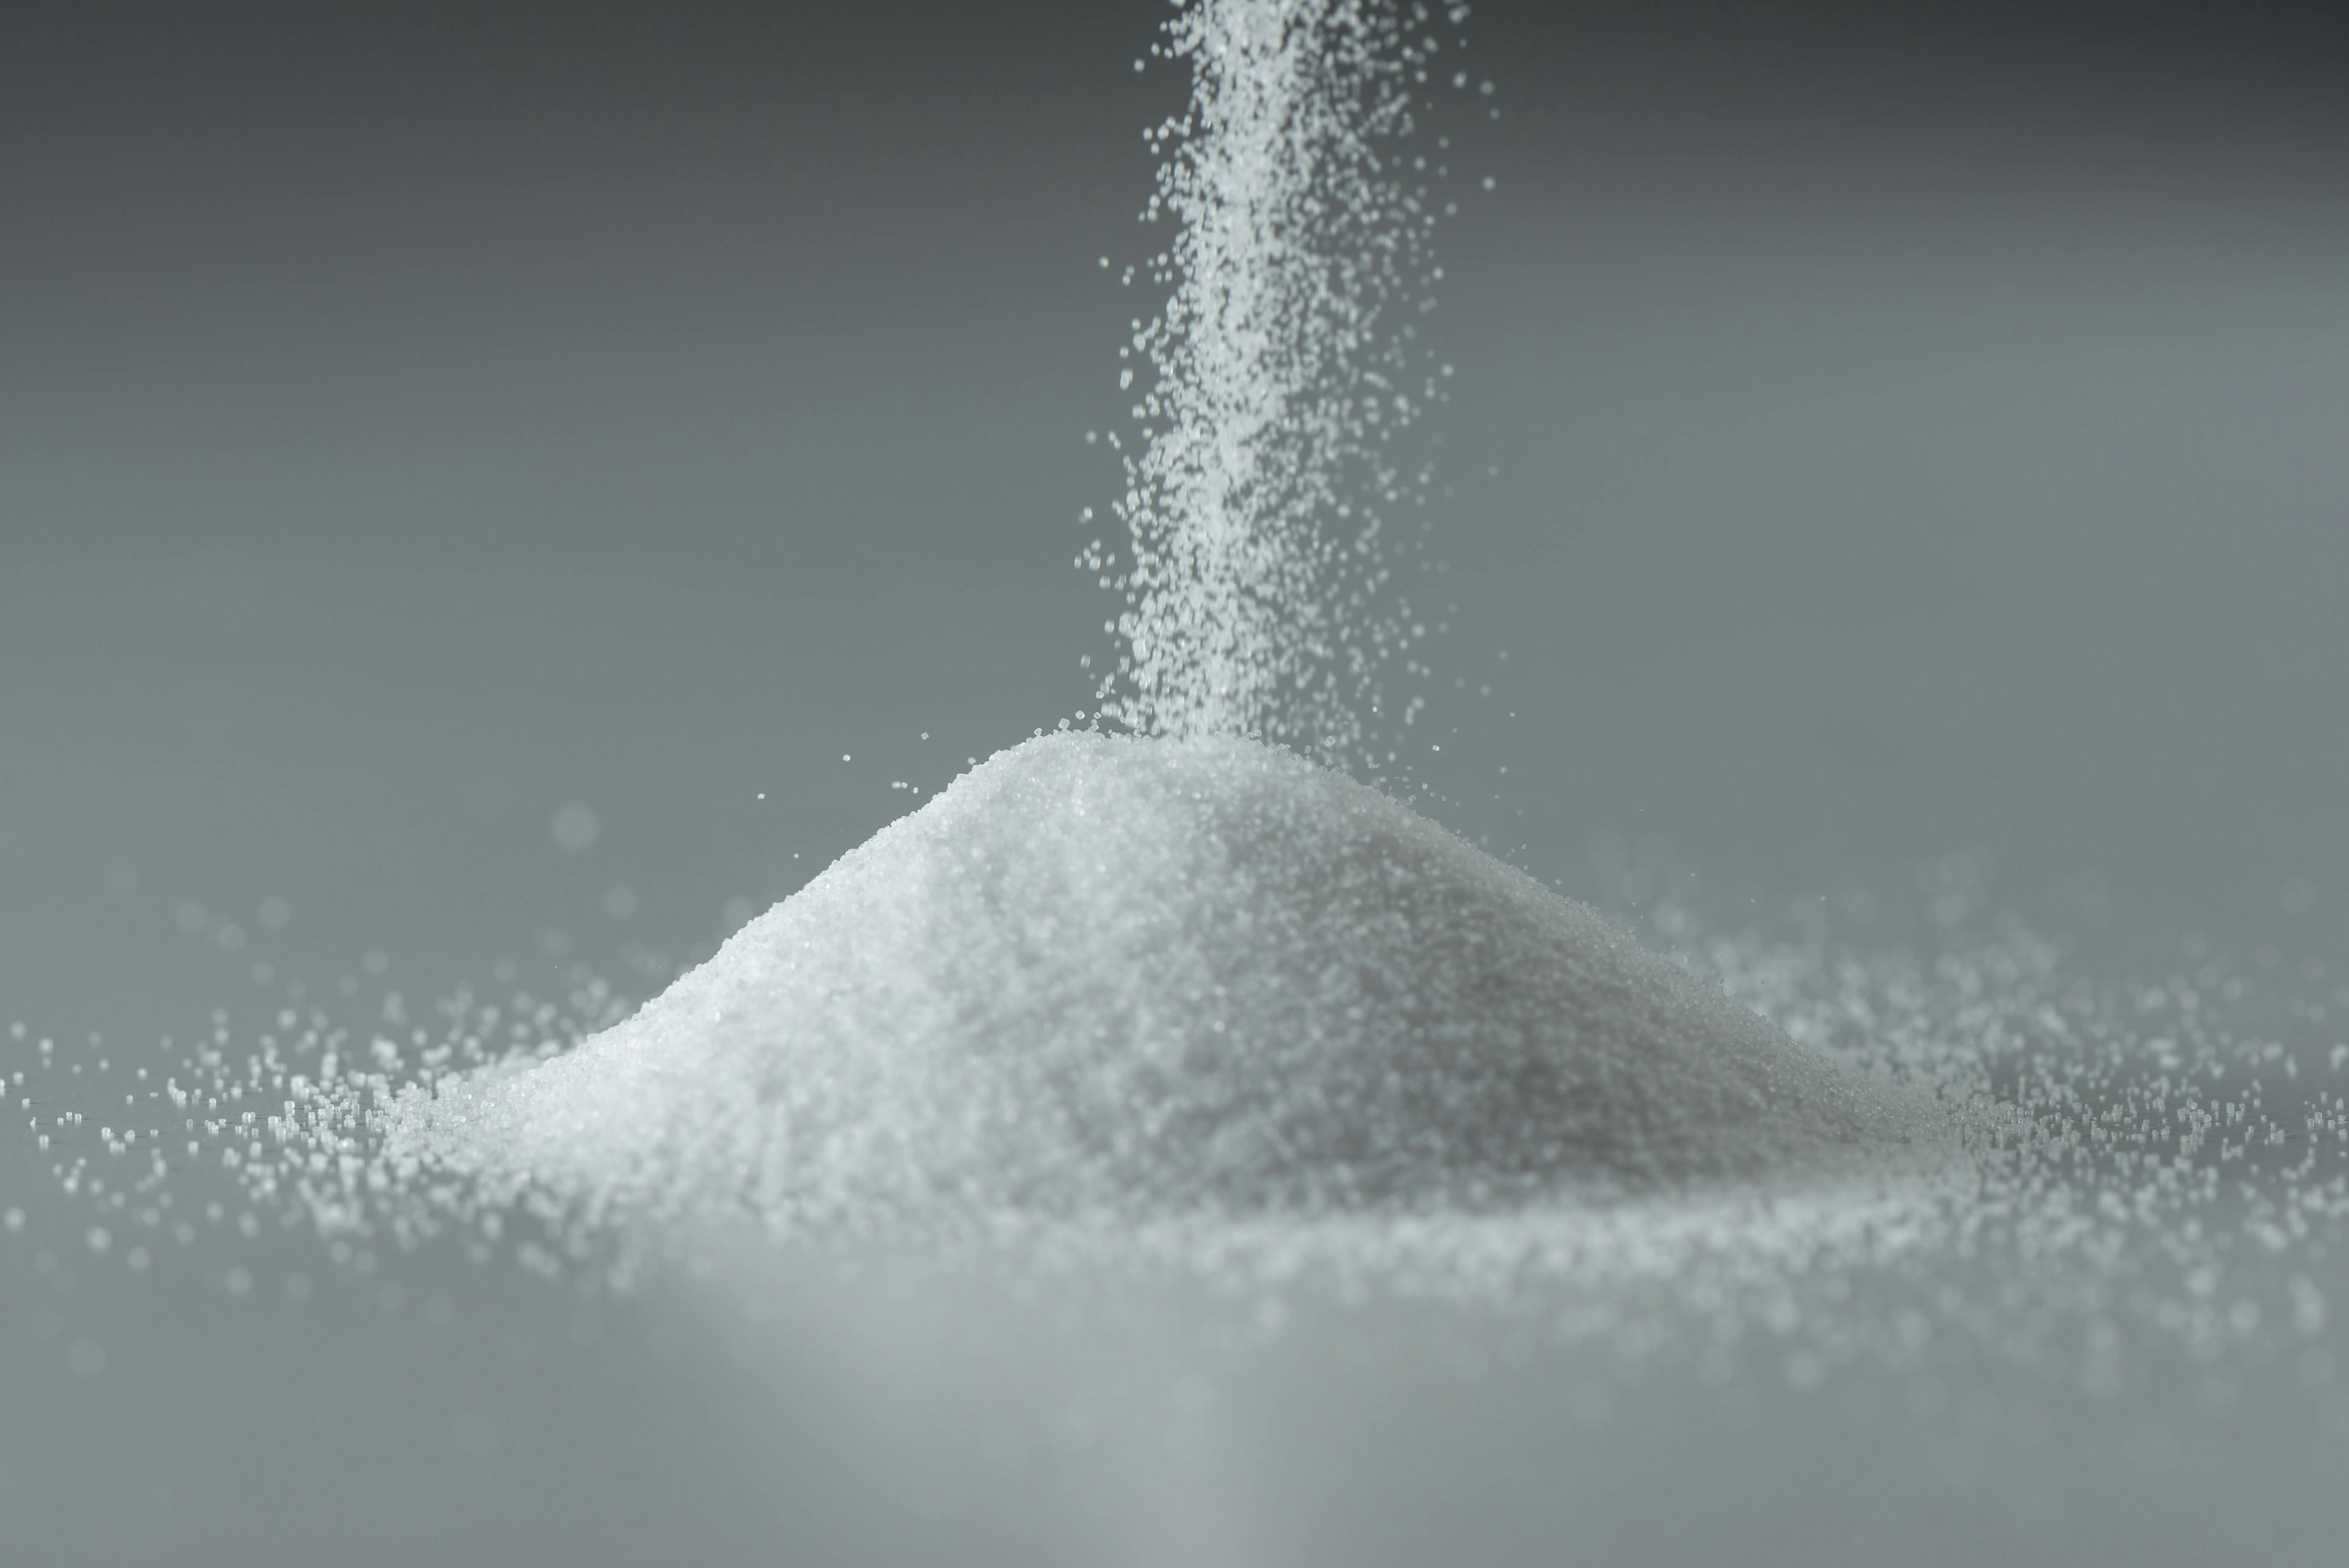 FDA to Food Industry: Cut Sodium in Processed and Packaged Foods